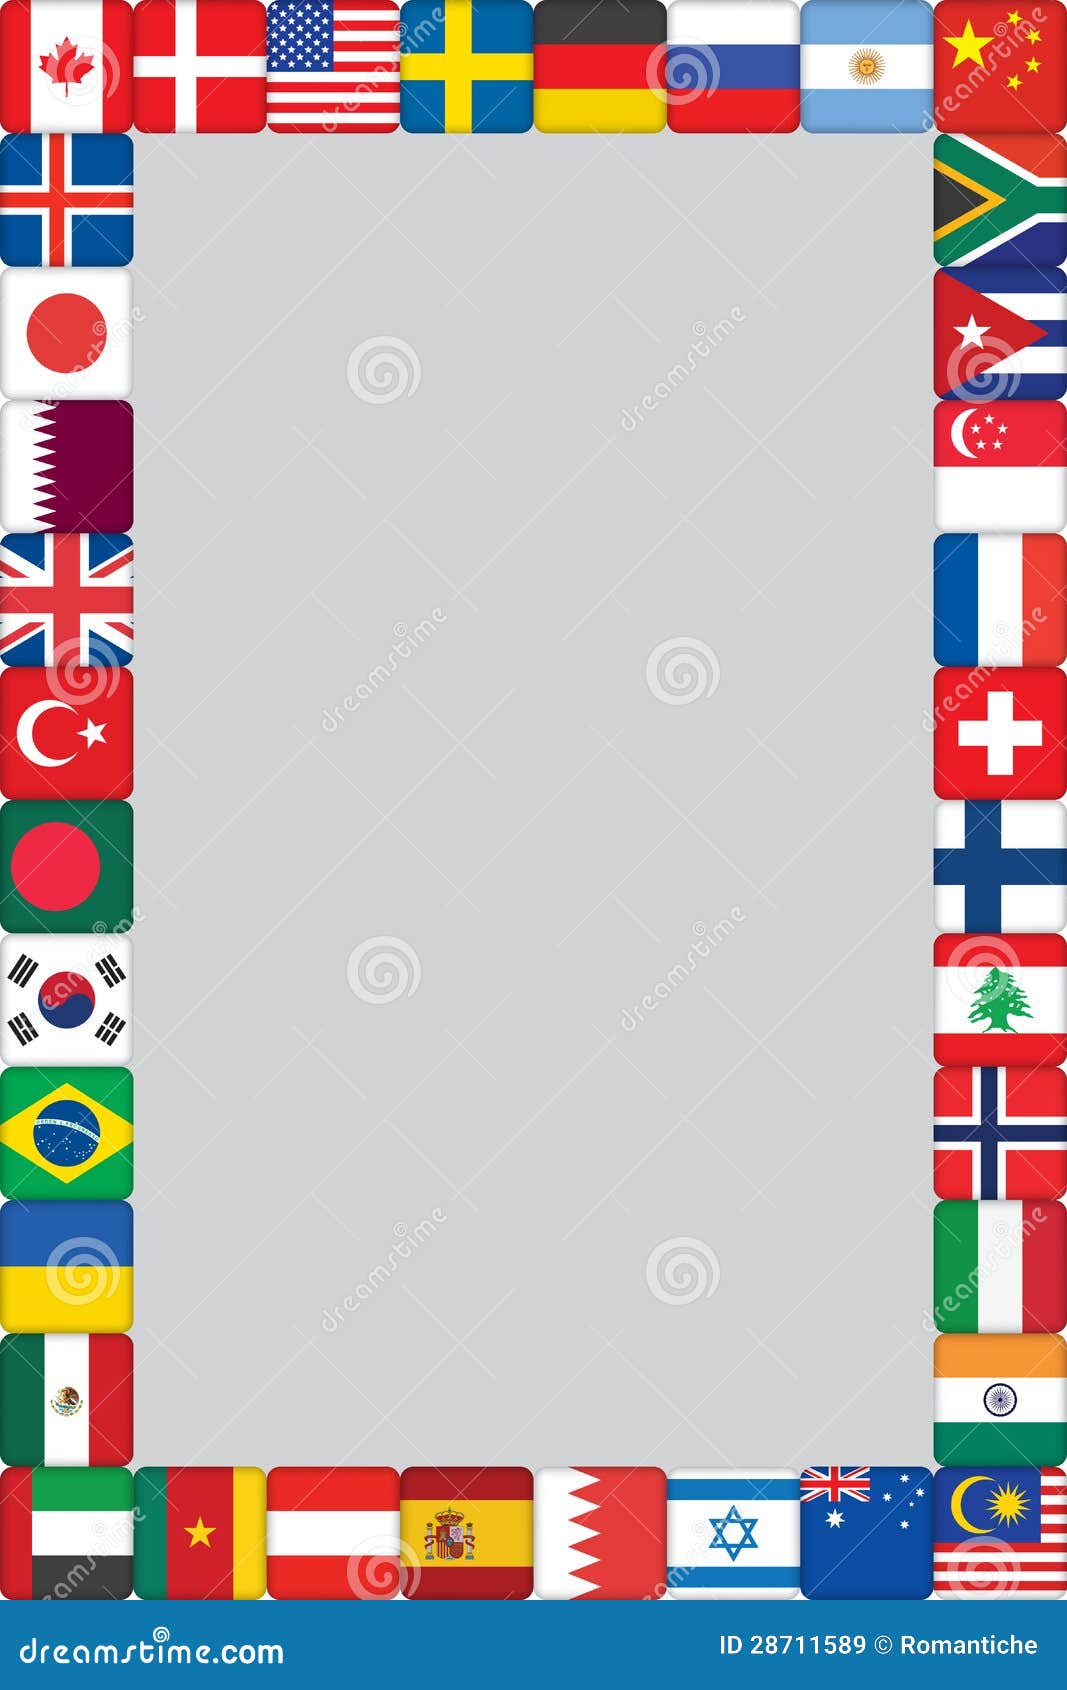 clipart world flags free - photo #25